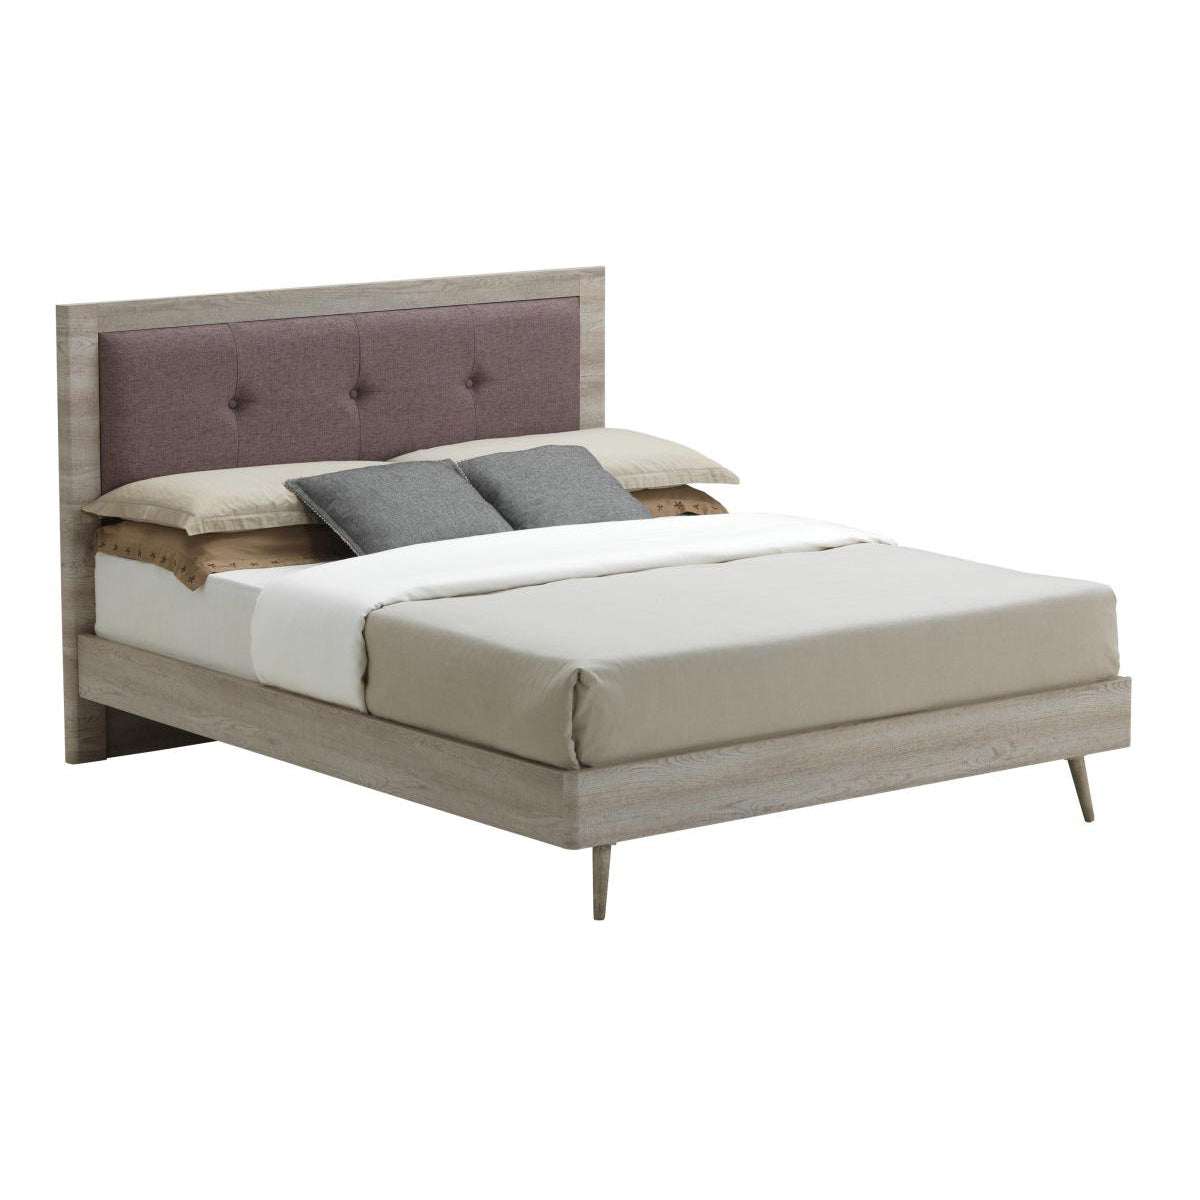 Belvoir Double Bed Grey Oak And Mocca Fabric